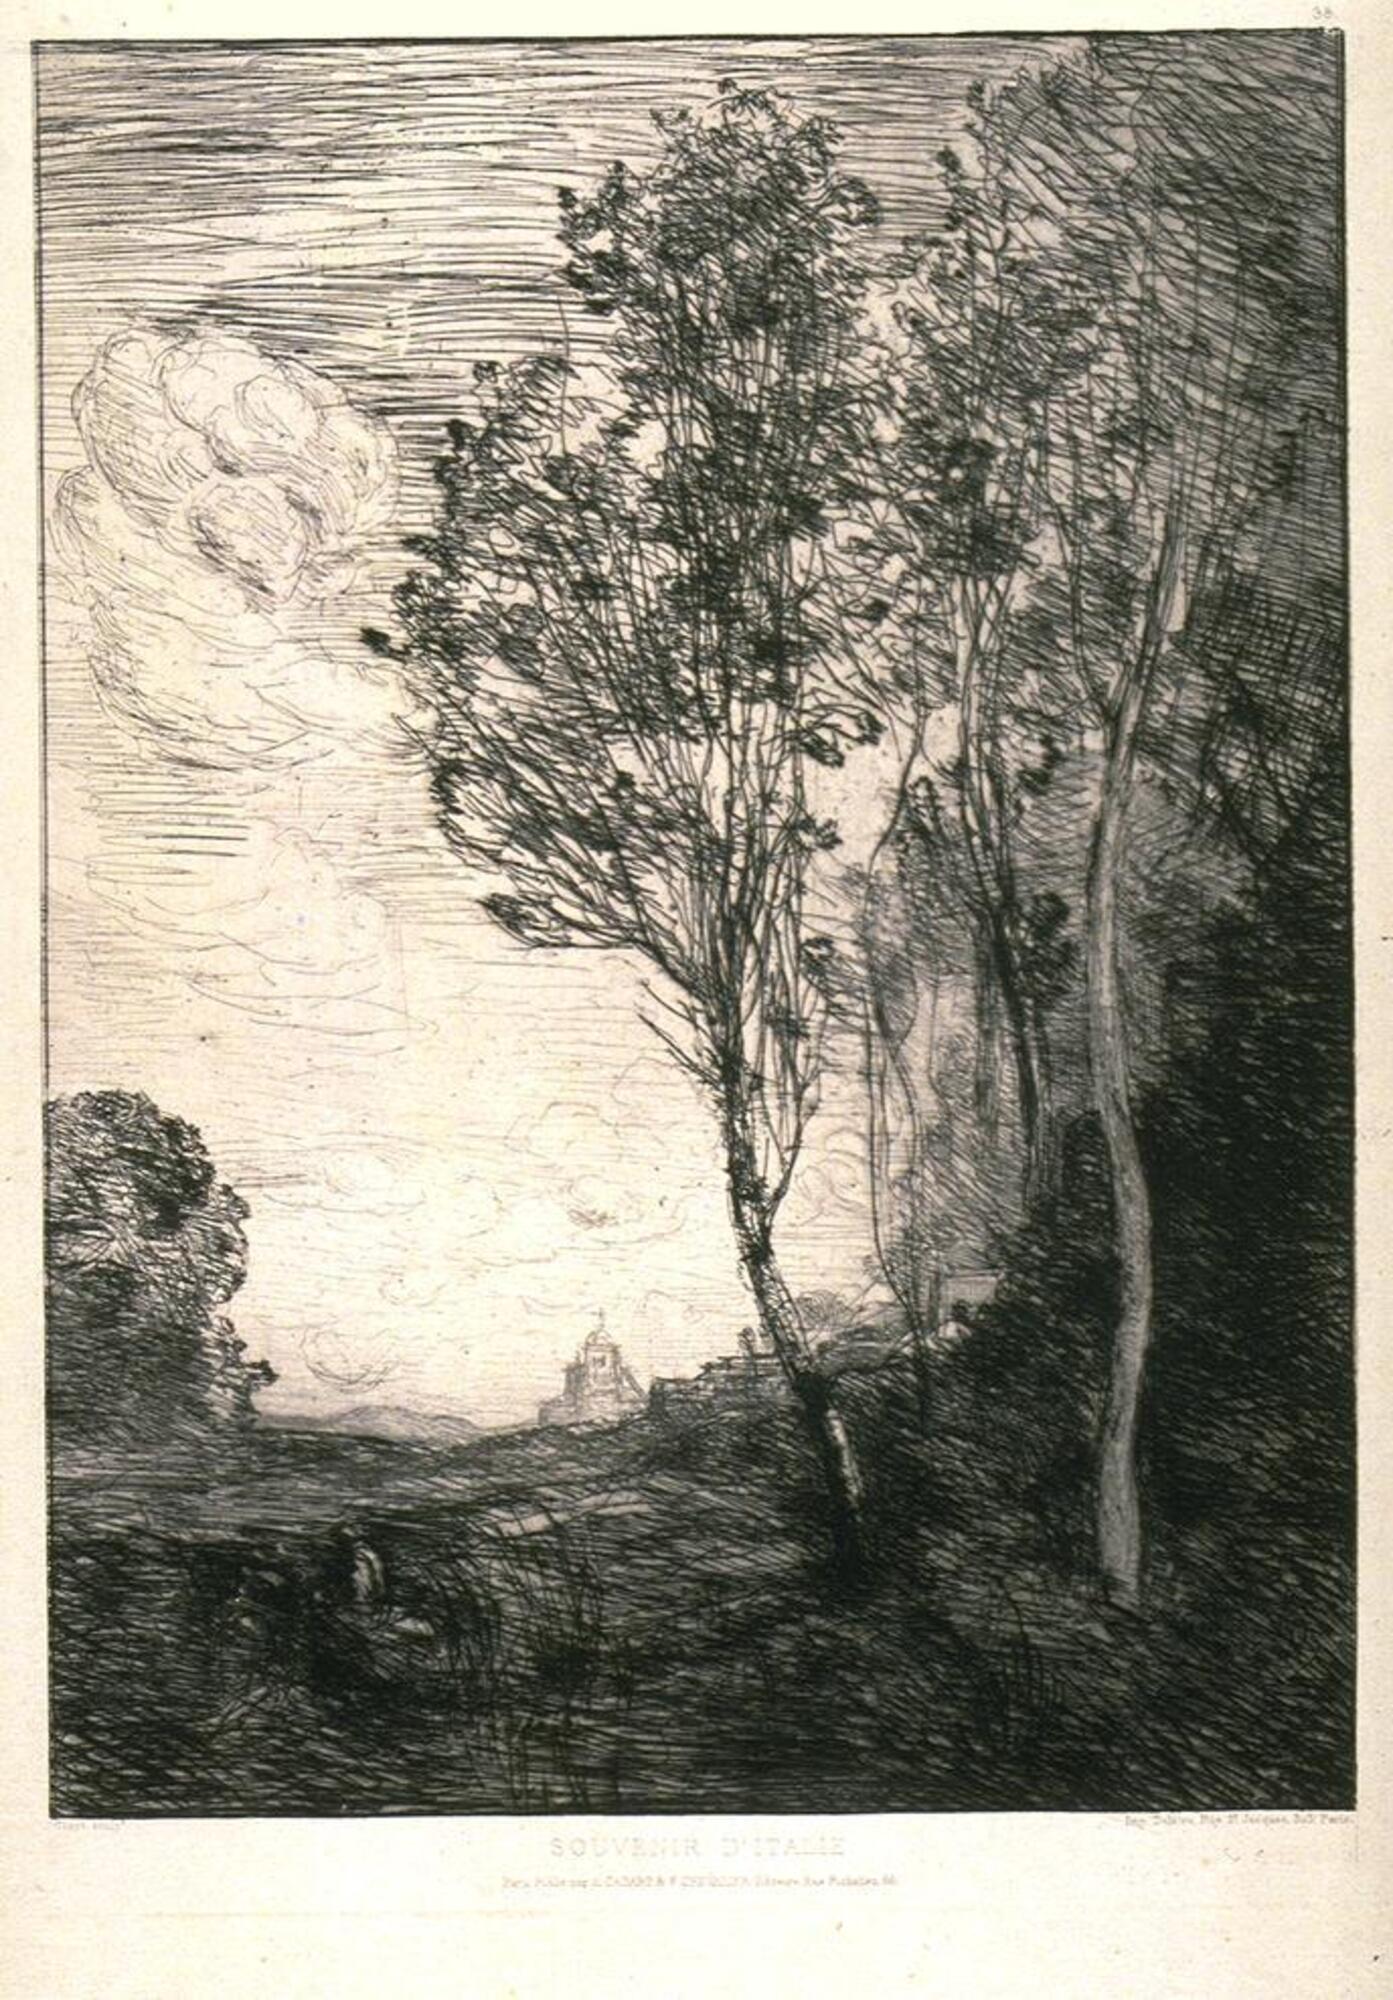 Vertically orientated image with trees along a hil like sketching on the right side of the image.  Two tree trunks and foliage are distinguishable in the foreground.  To the left of the trees and in the bottom third of the image is a small church-like structure very faint compared to trees and land.  There is a a cloud in the upper half of the left side of the image, just barely extending into the tree foliage.